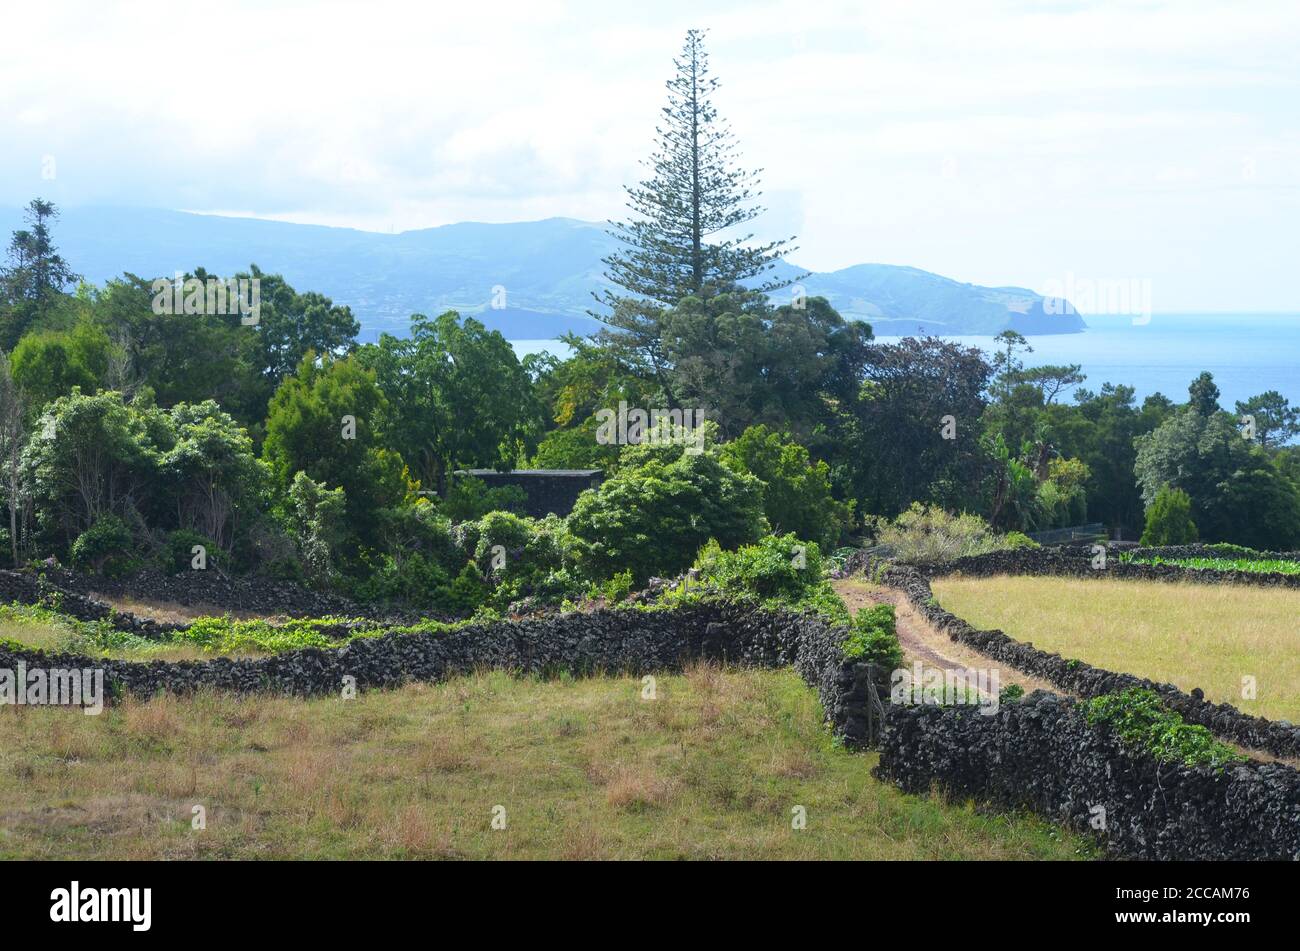 Rural paths amidst vineyards and lush vegetation in Pico island, Azores archipelago Stock Photo